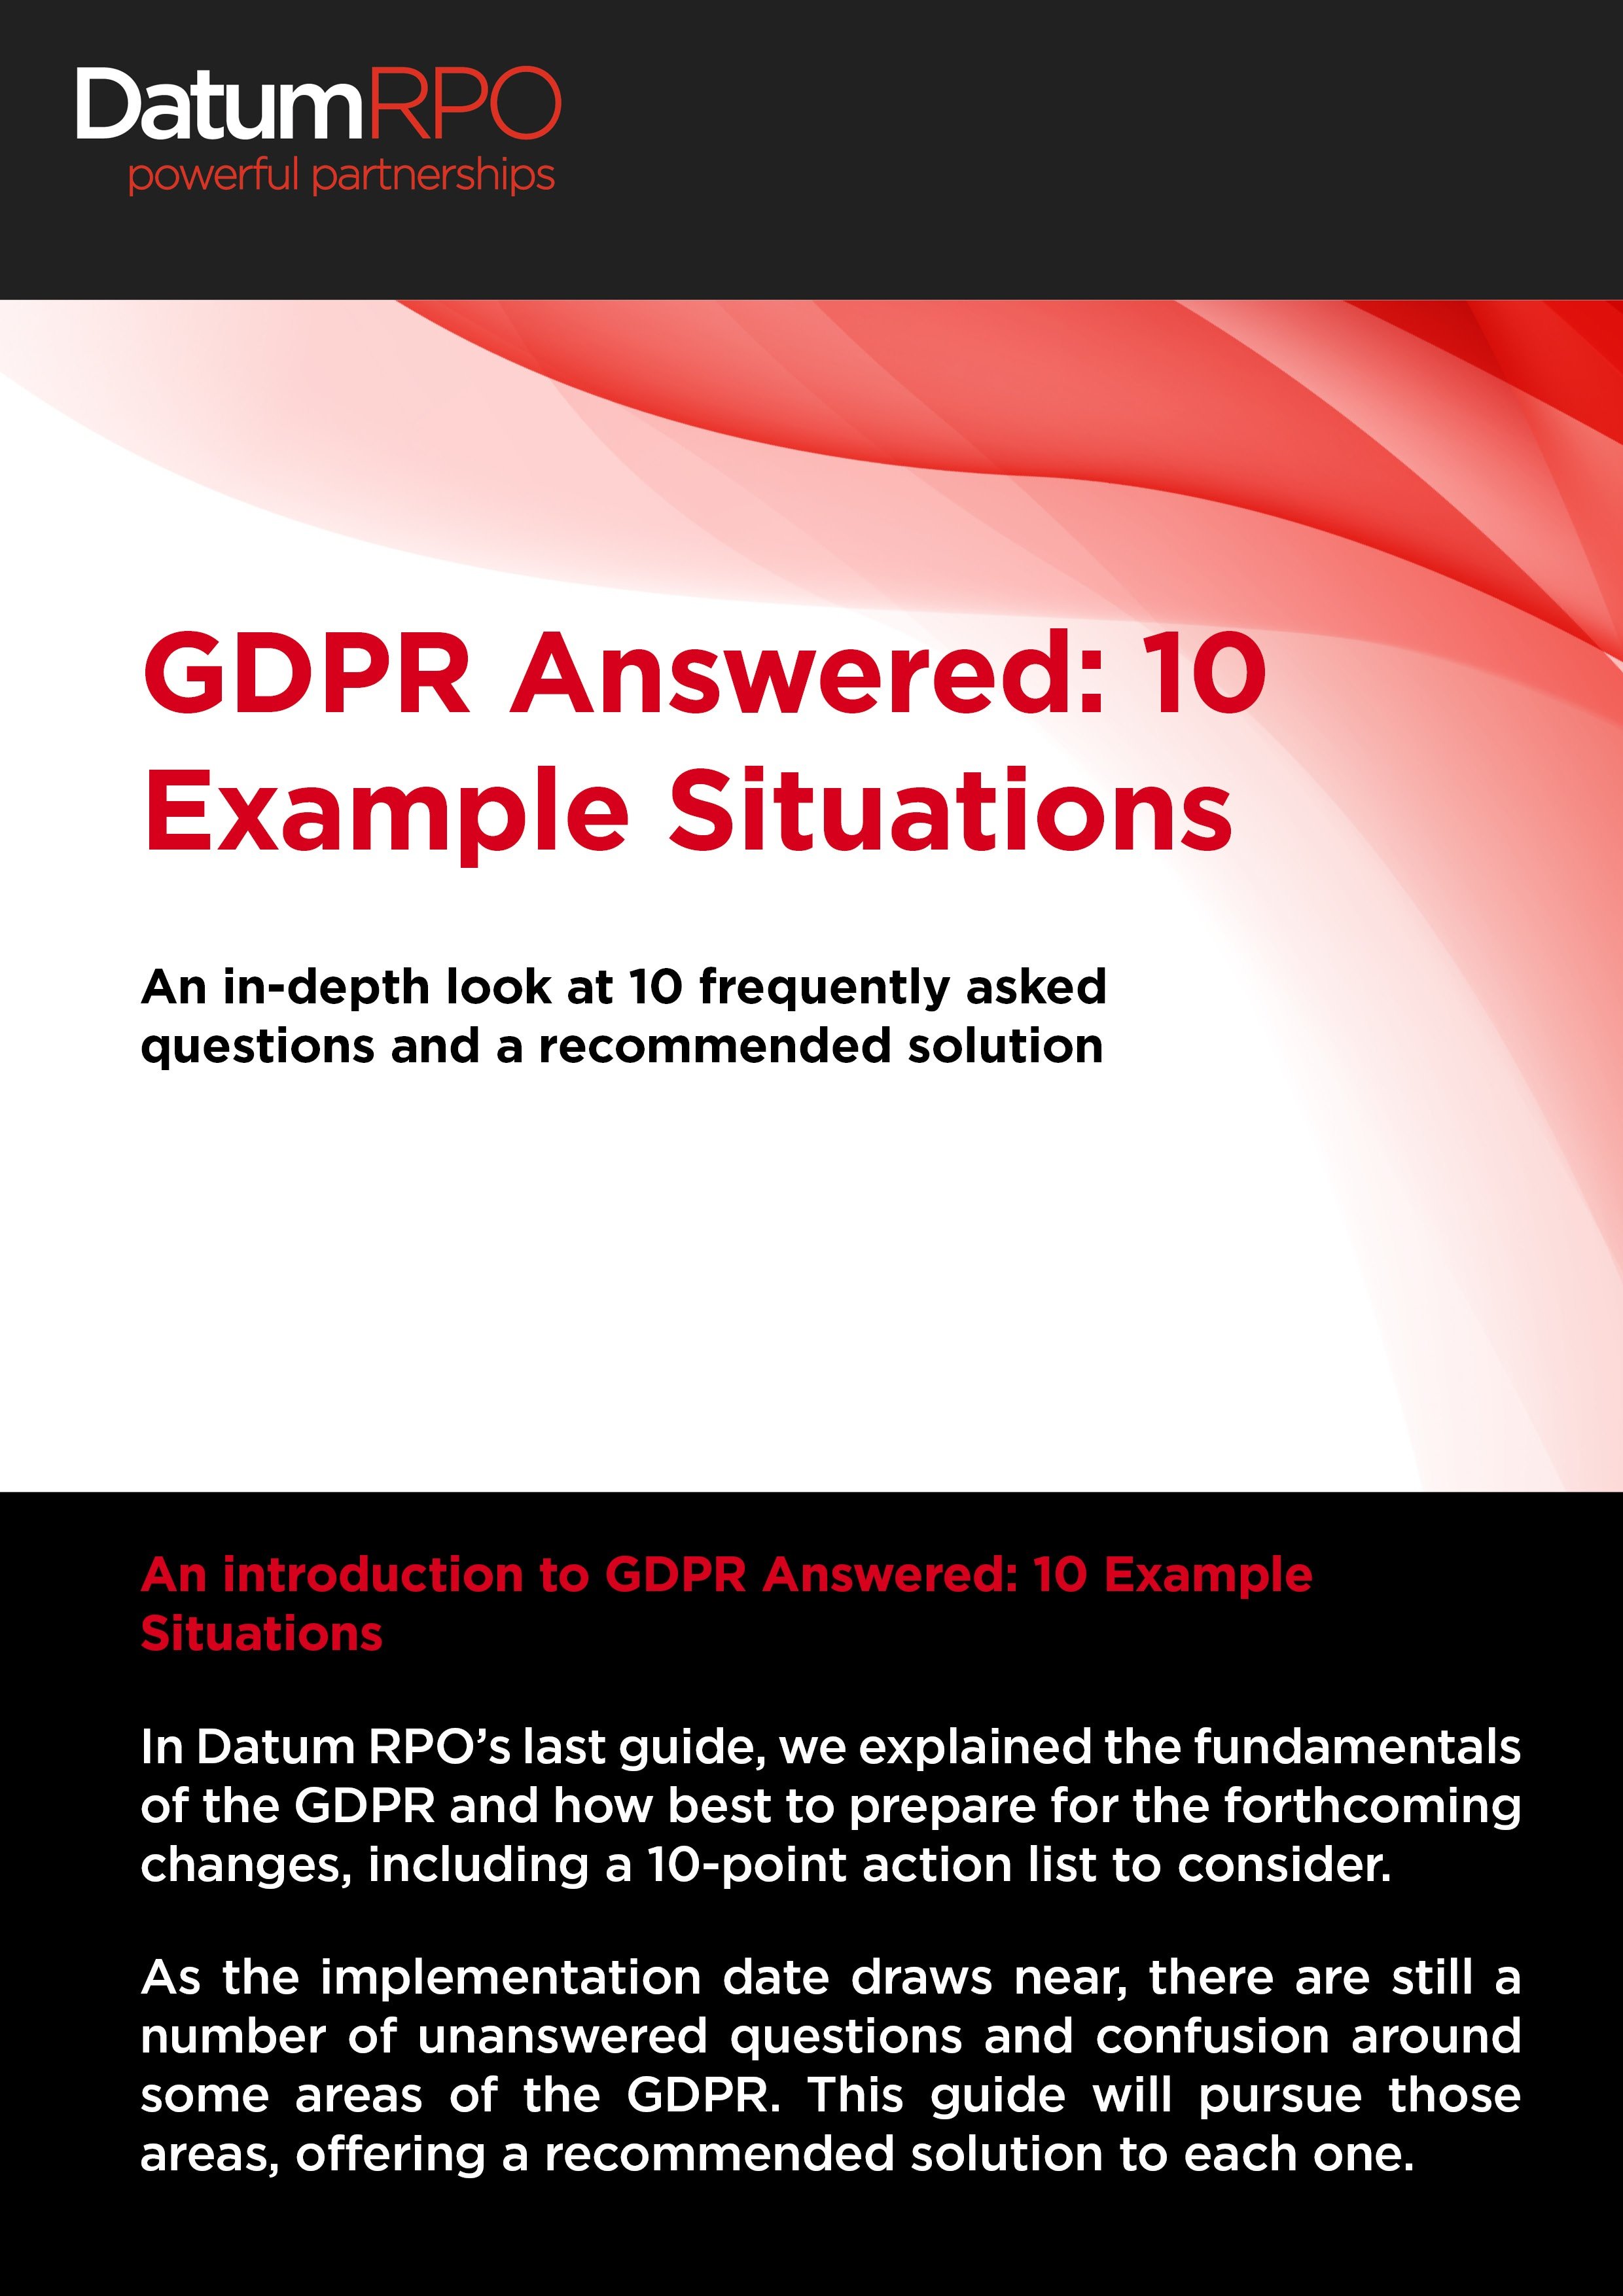 GDPR Answered: 10 Example Situations